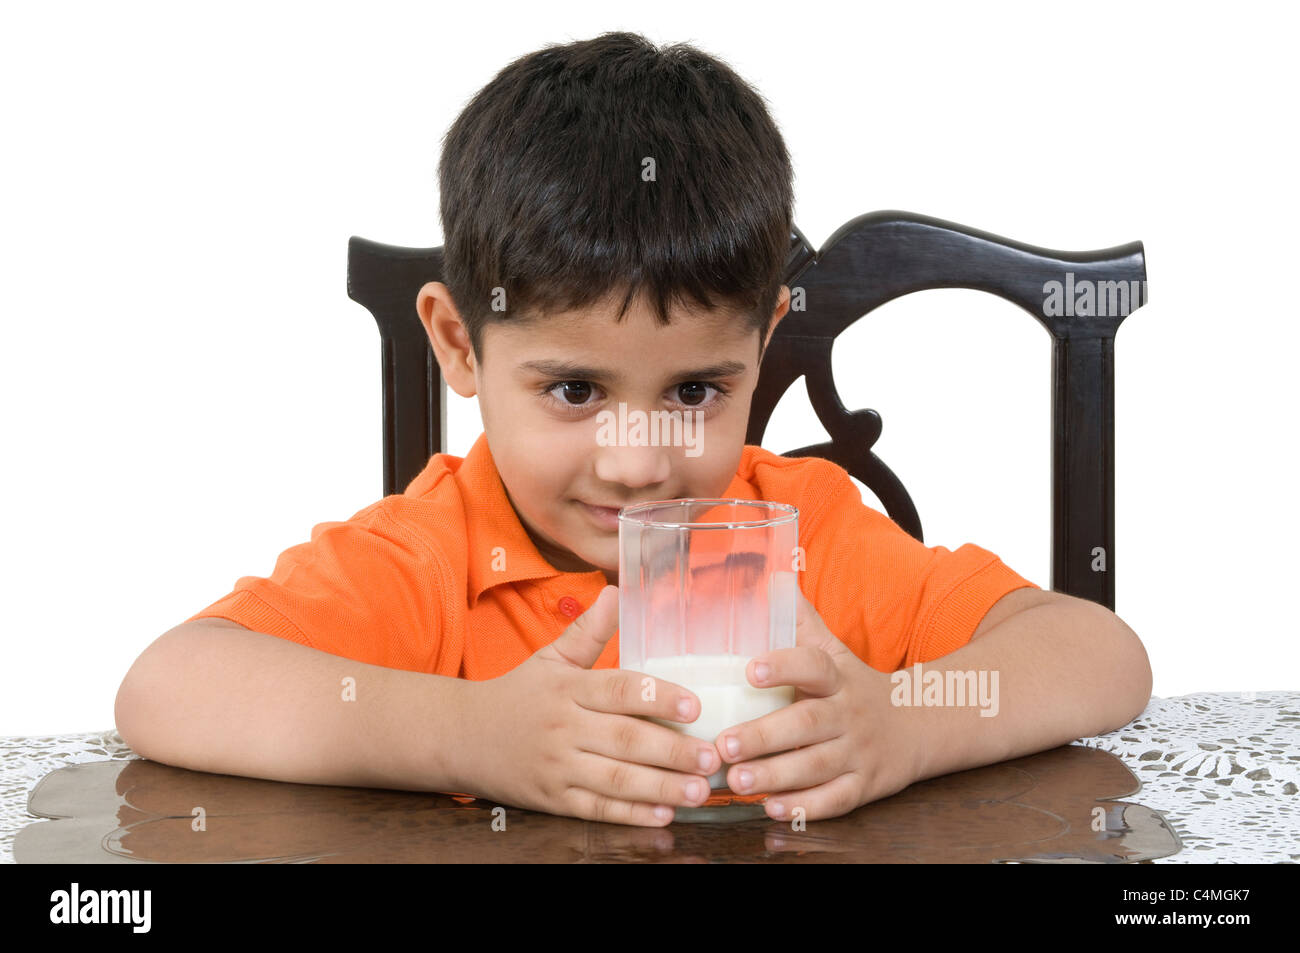 A small Indian boy holding a glass of milk. Stock Photo